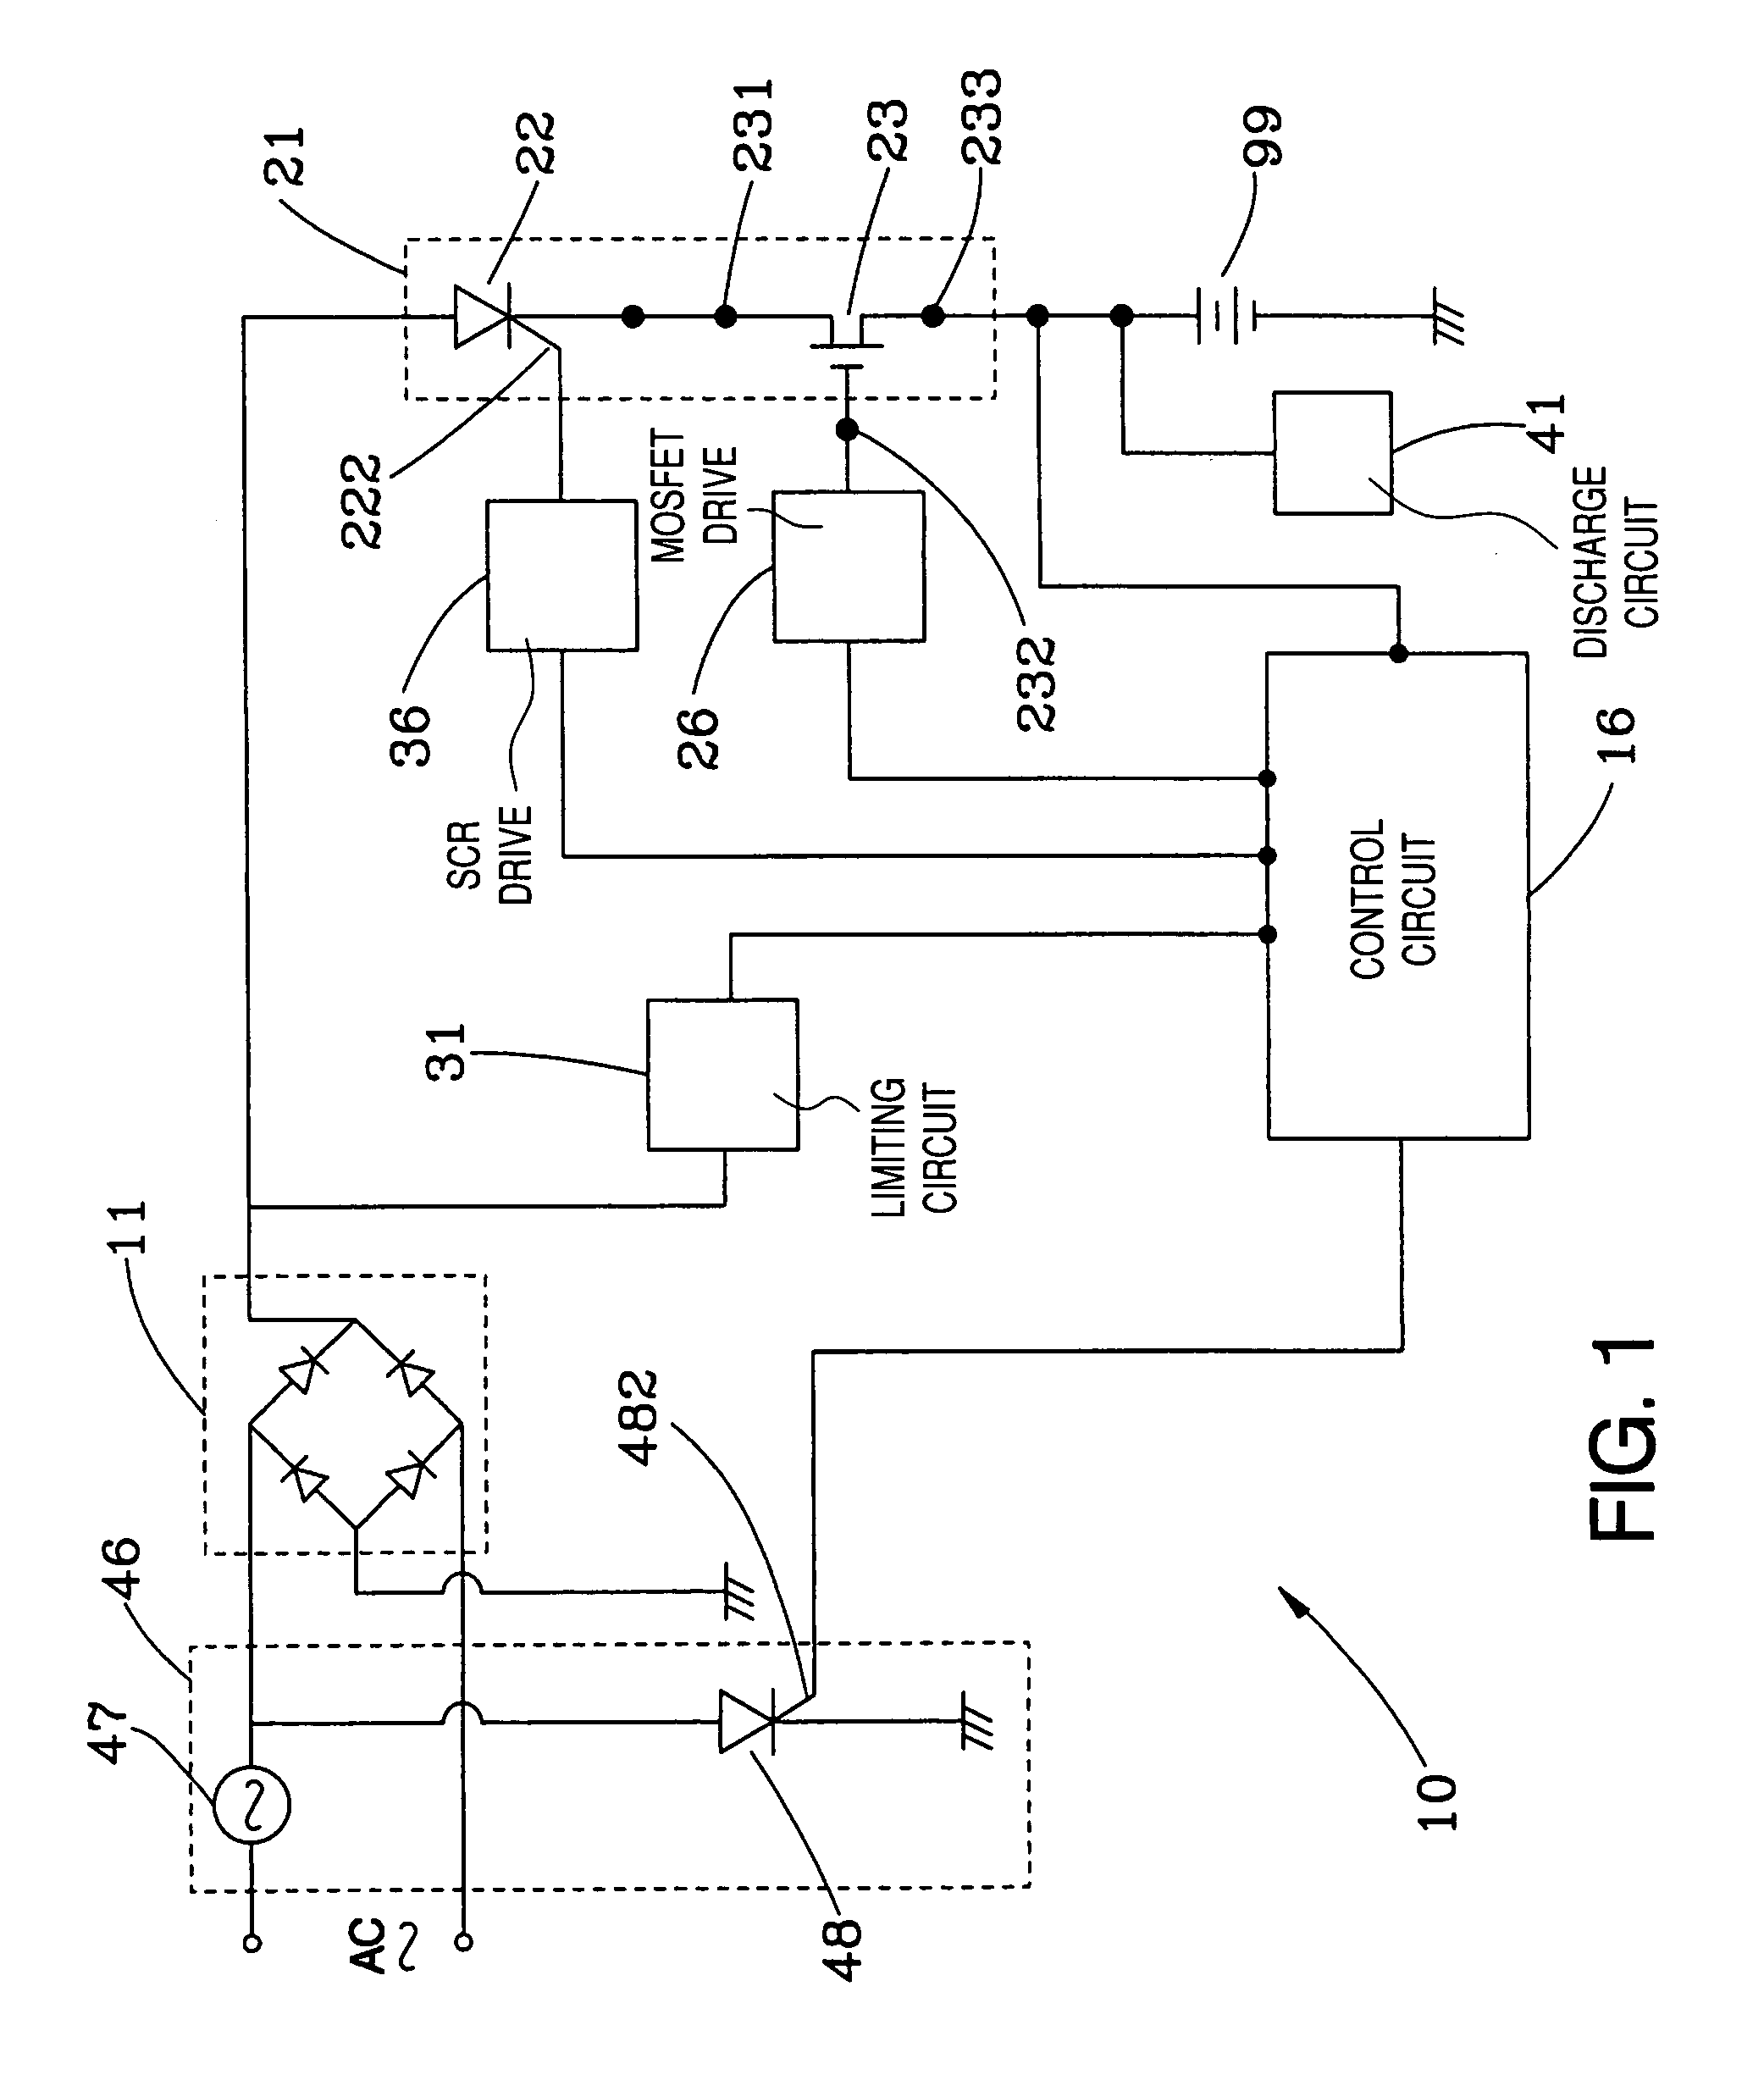 Battery charging and/or DC power supply circuitry